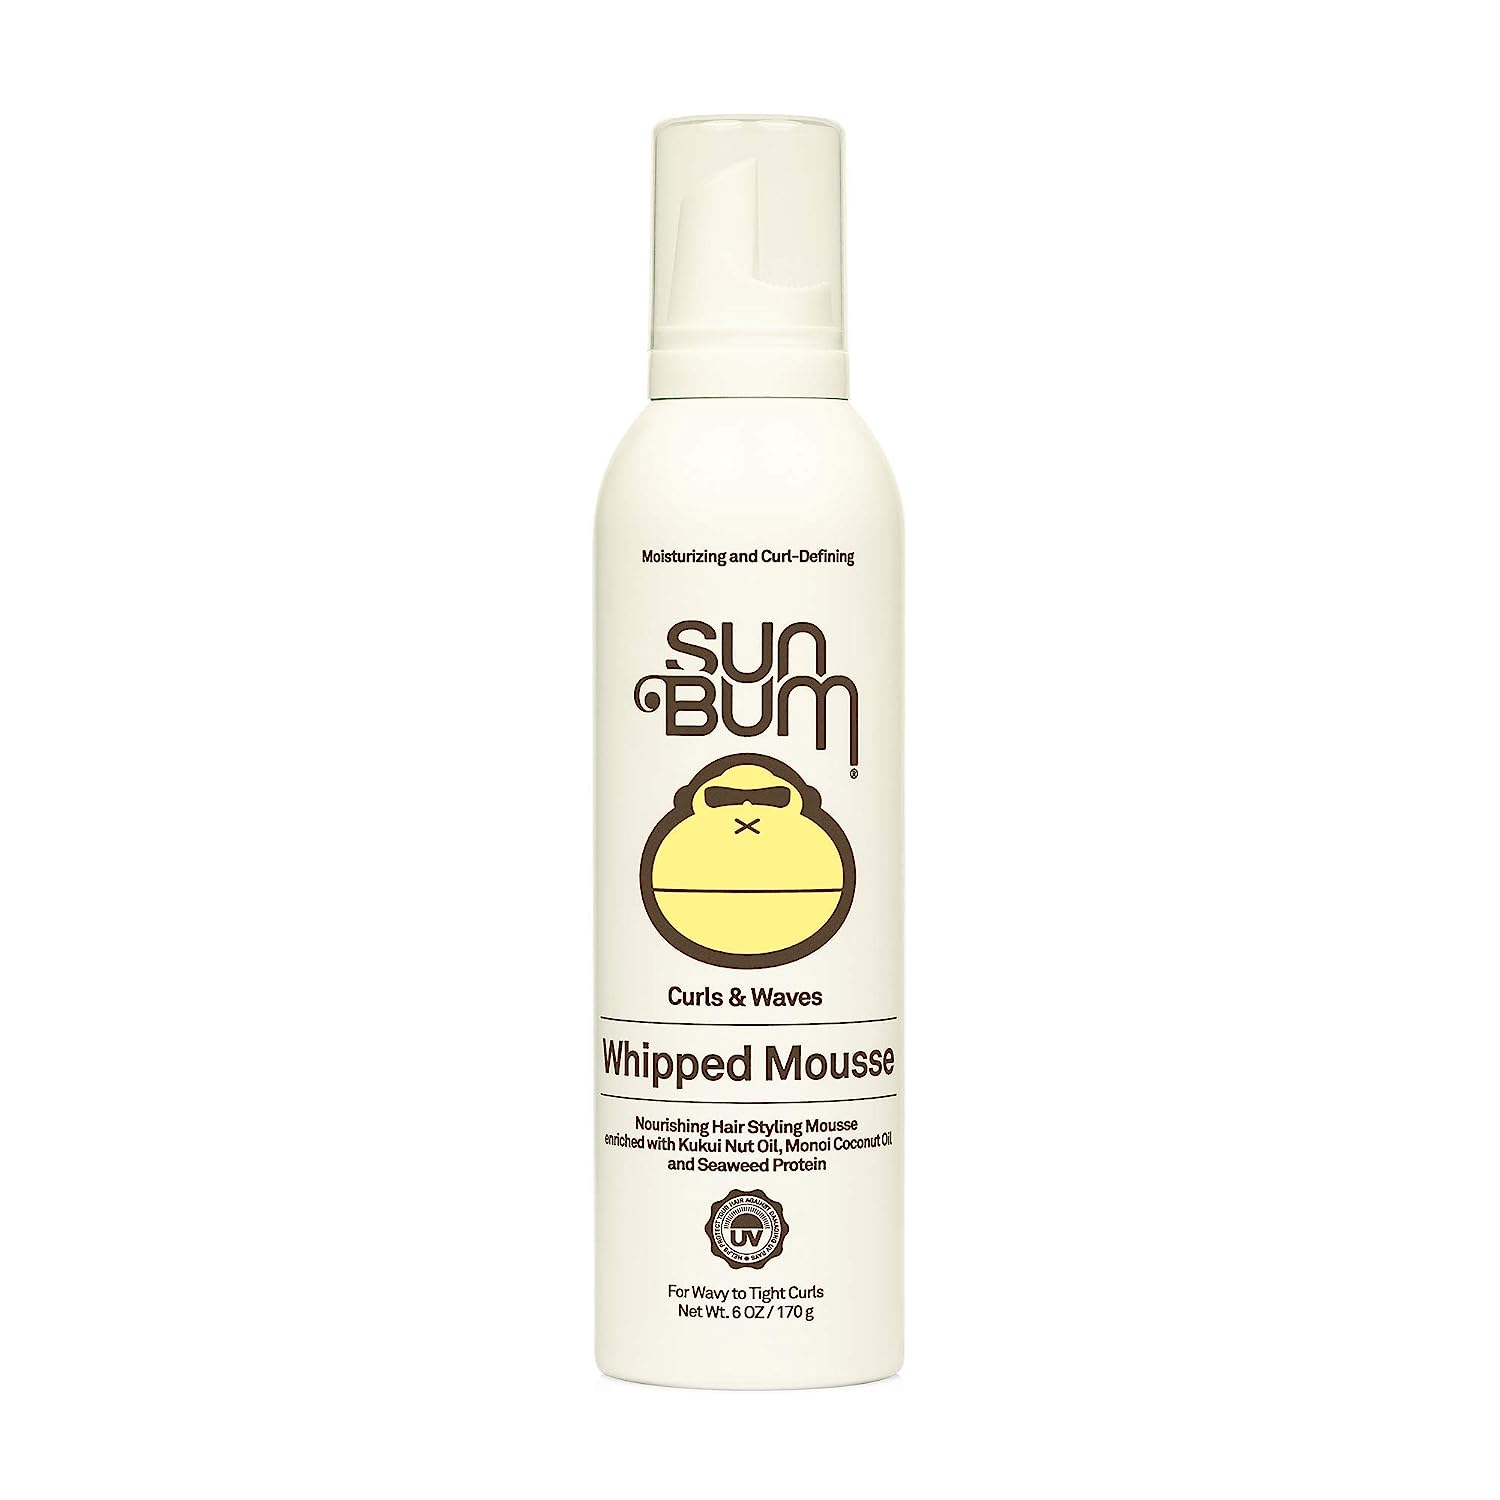 Sun Bum Curls & Waves Whipped Mousse Vegan and Cruelty [...]